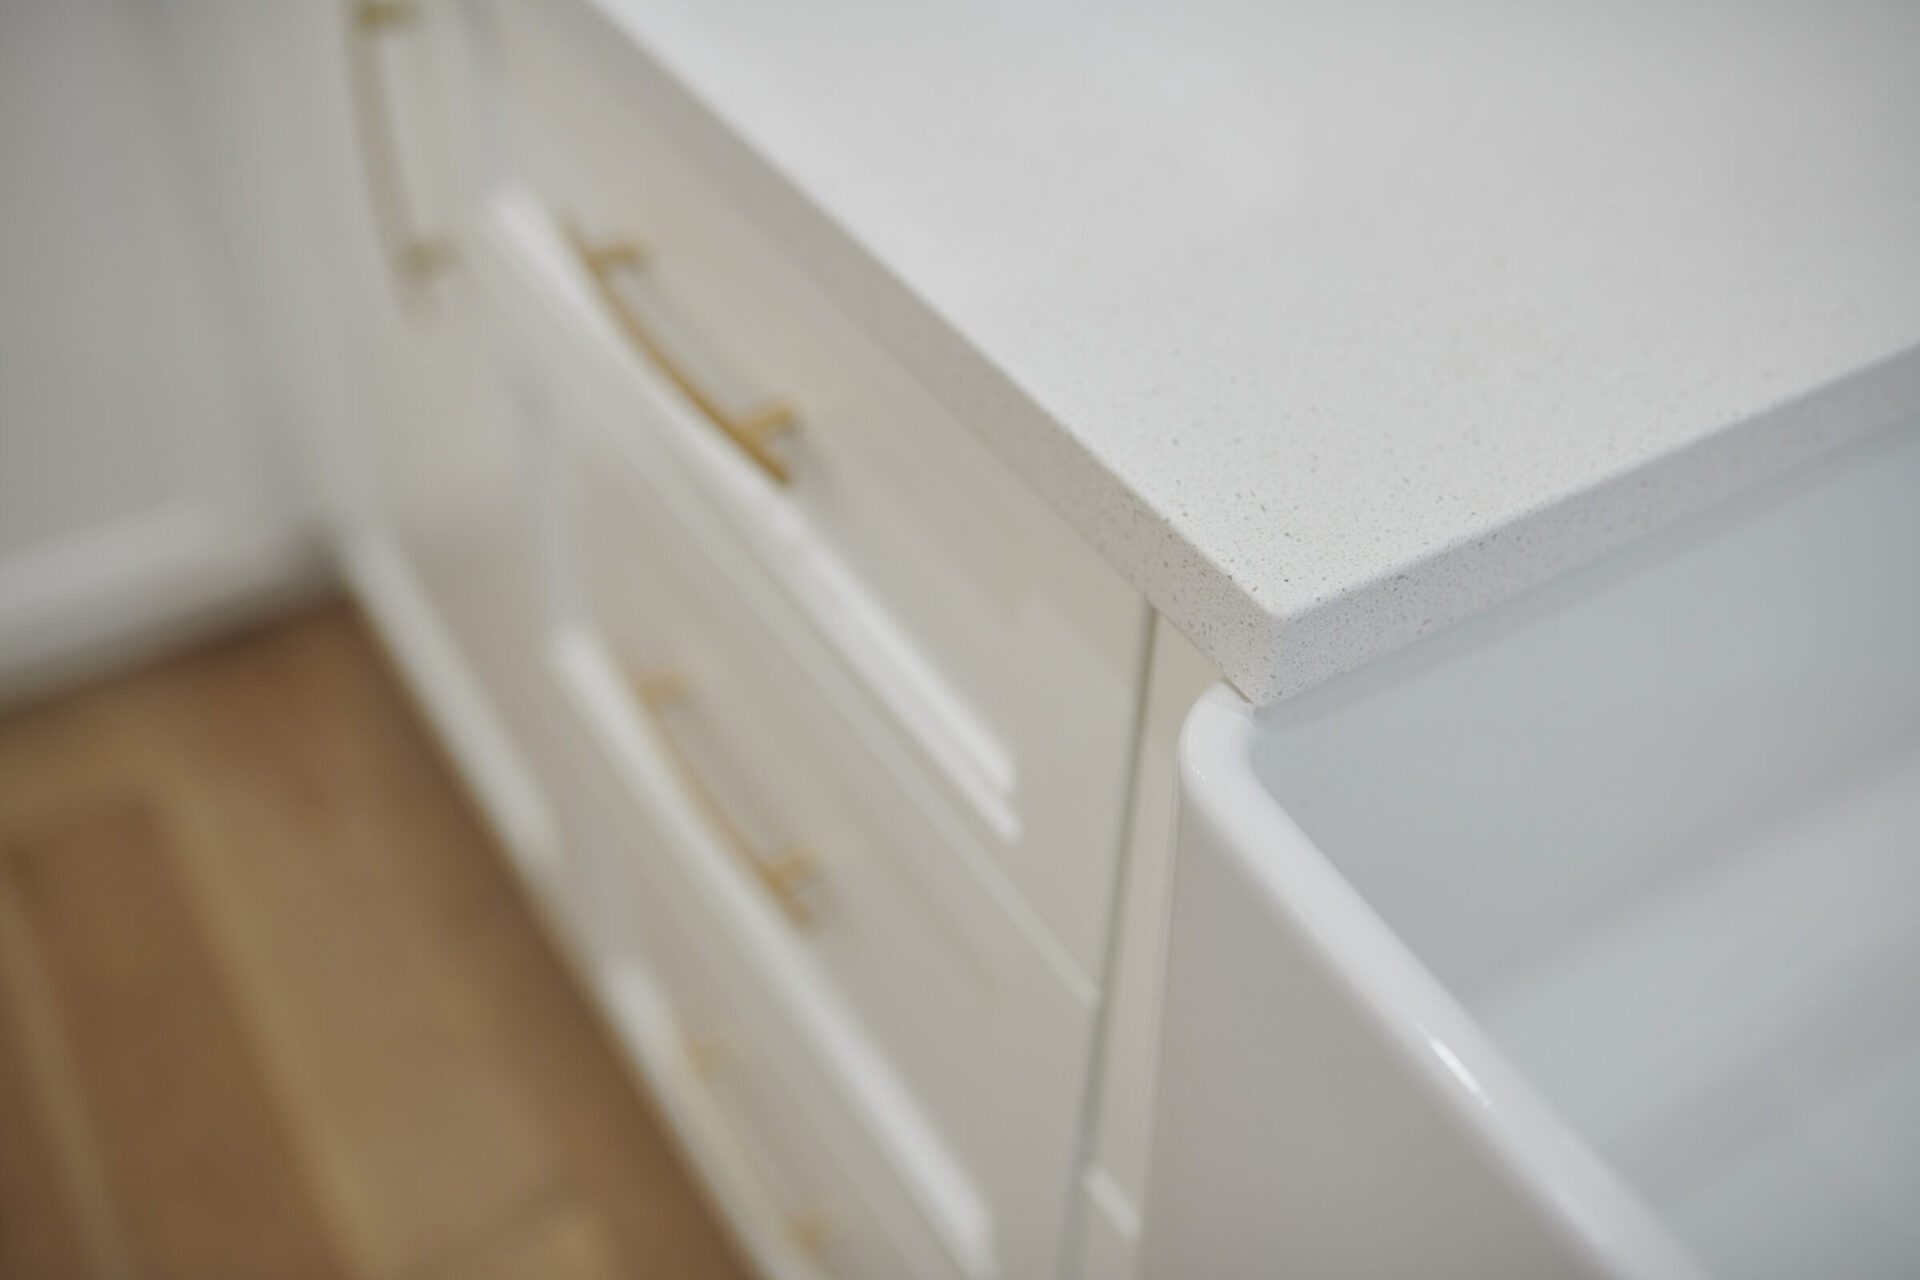 This image shows a close-up of a white kitchen countertop with speckled pattern, above white cabinets with gold handles, against a soft-focus background.